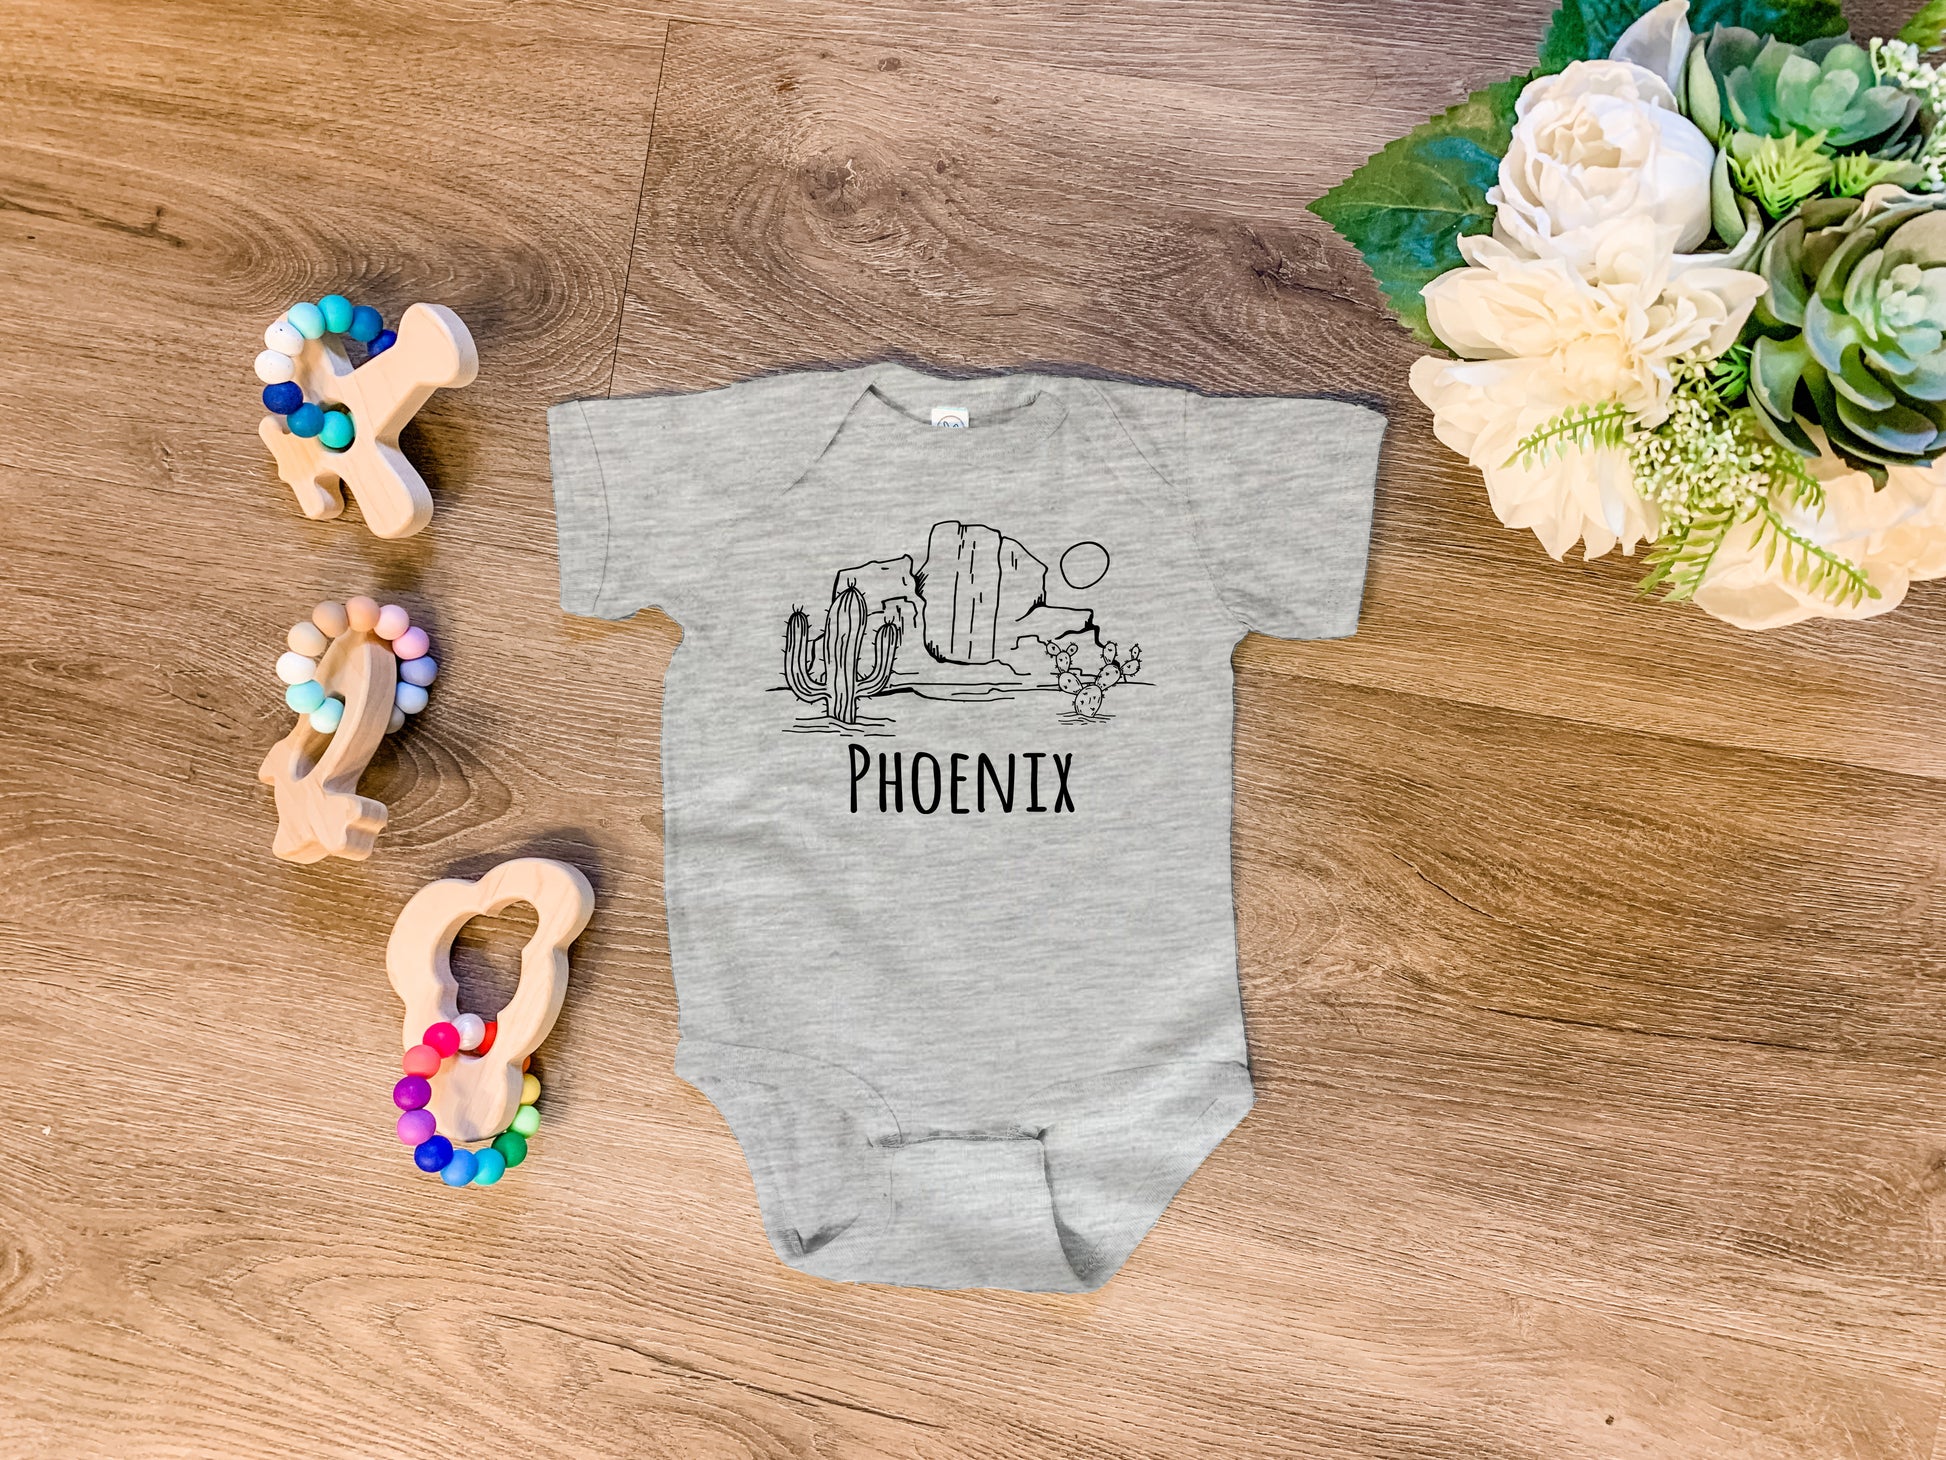 a baby's bodysuit with the word pieonix on it next to